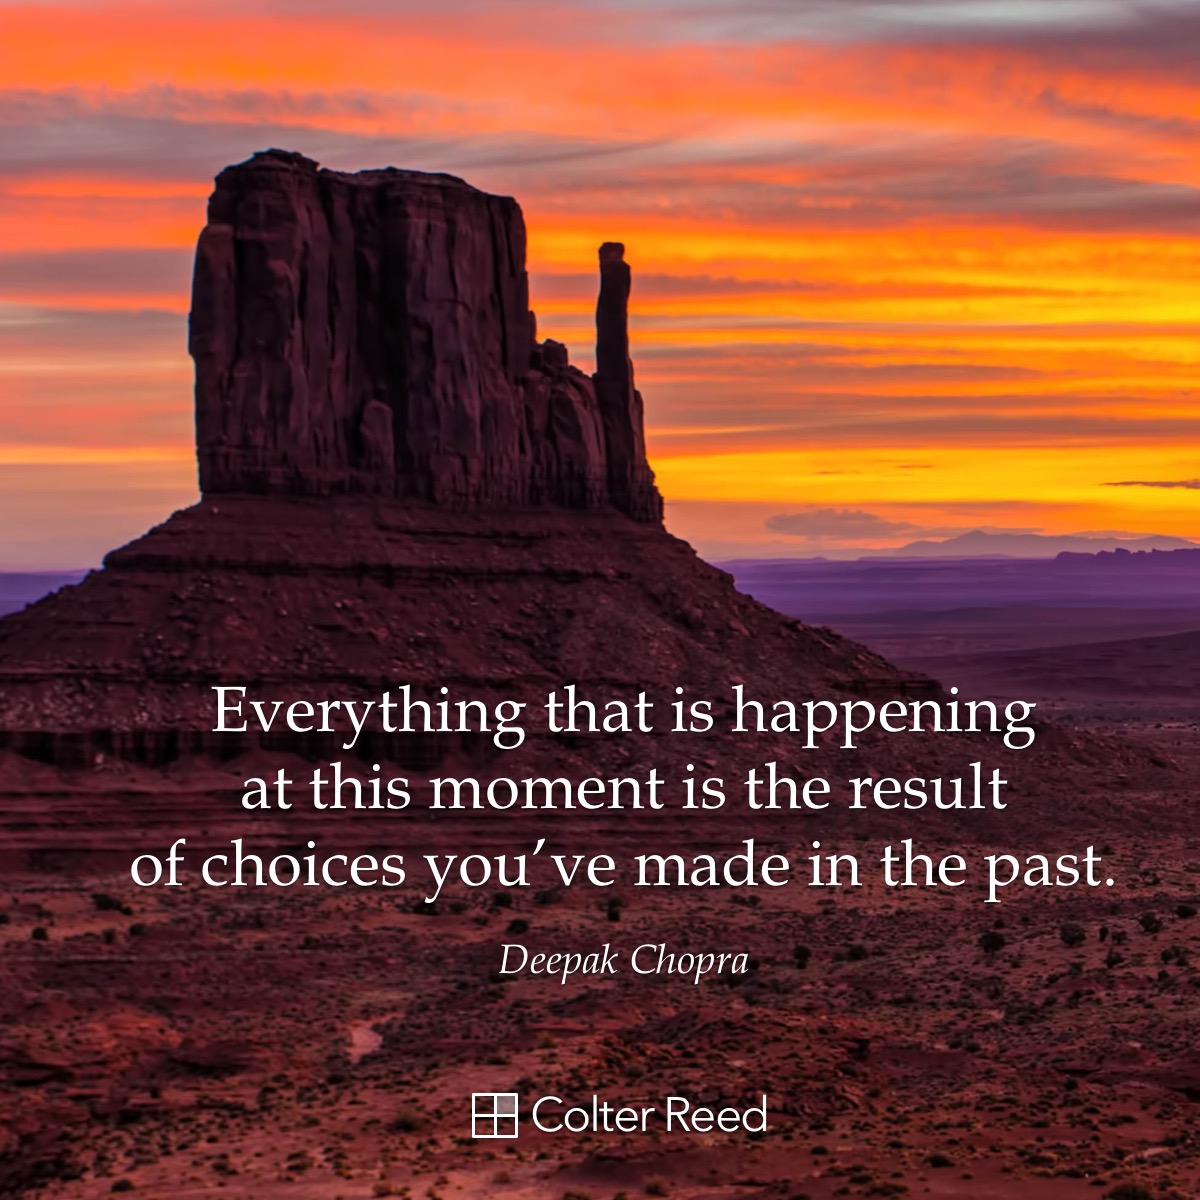 Everything that is happening at this moment is the result of choices you’ve made in the past. —Deepak Chopra